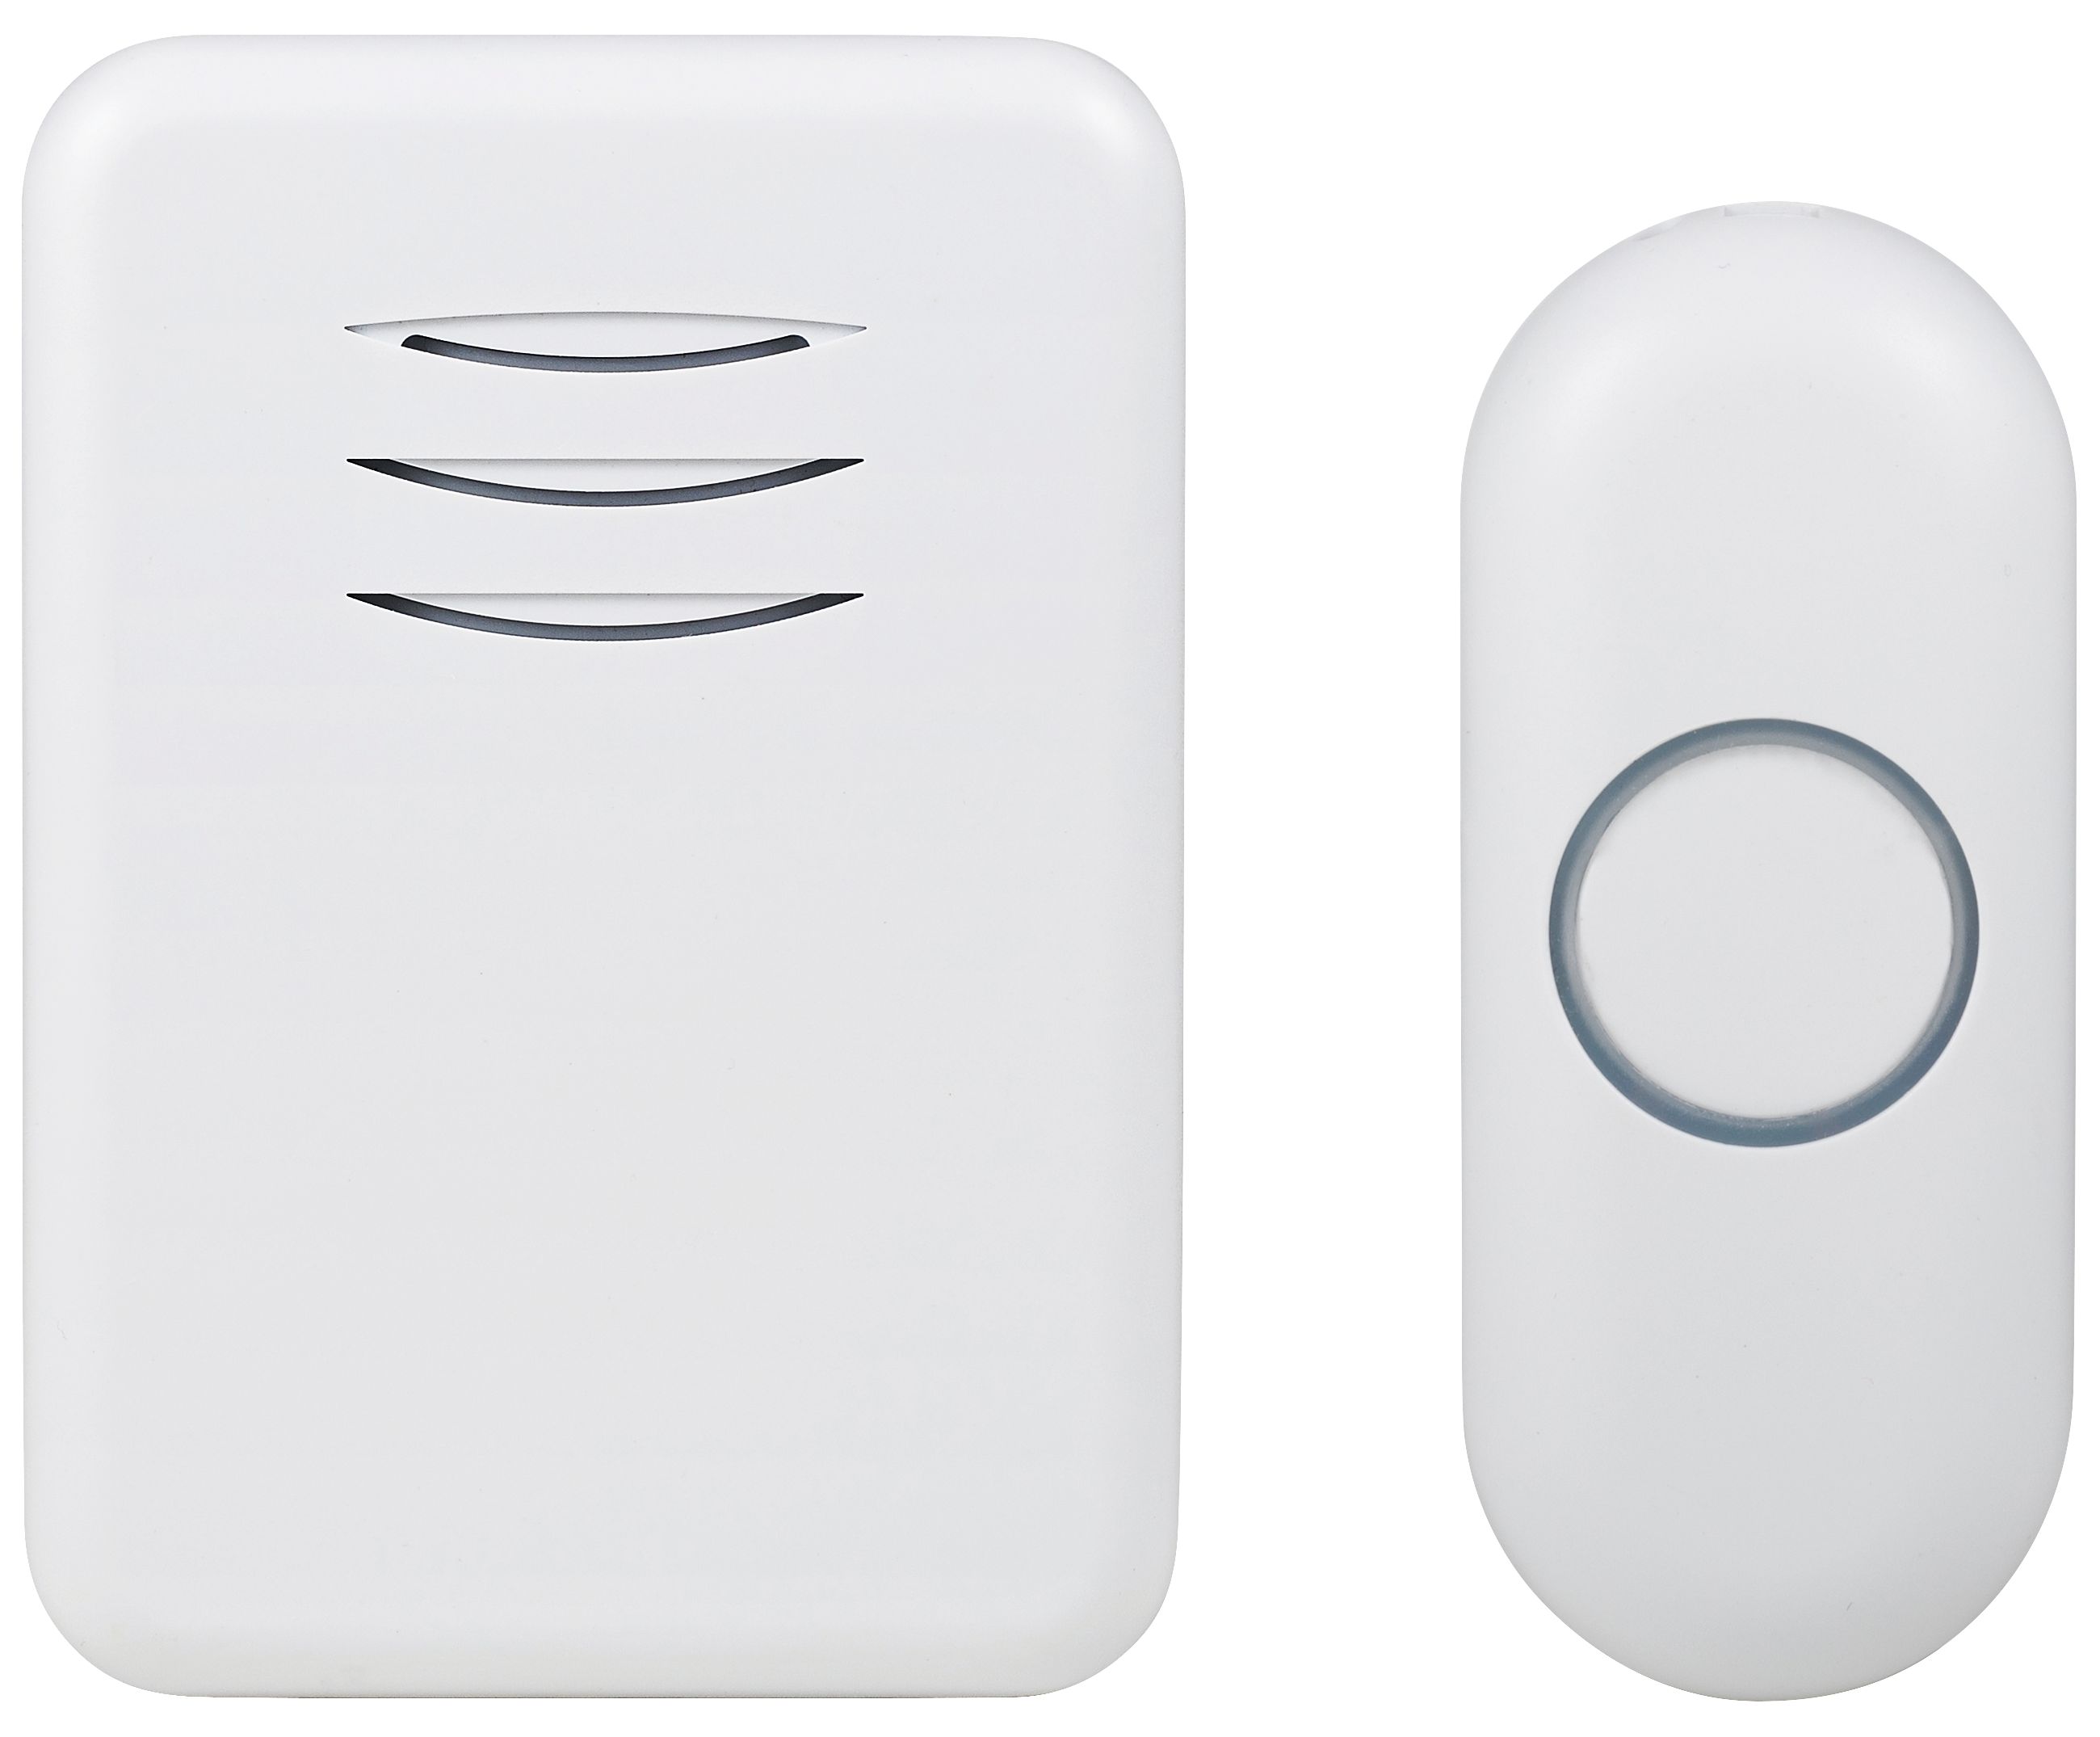 Image of Byron DBY-22311 150m Wireless Doorbell with Portable Chime